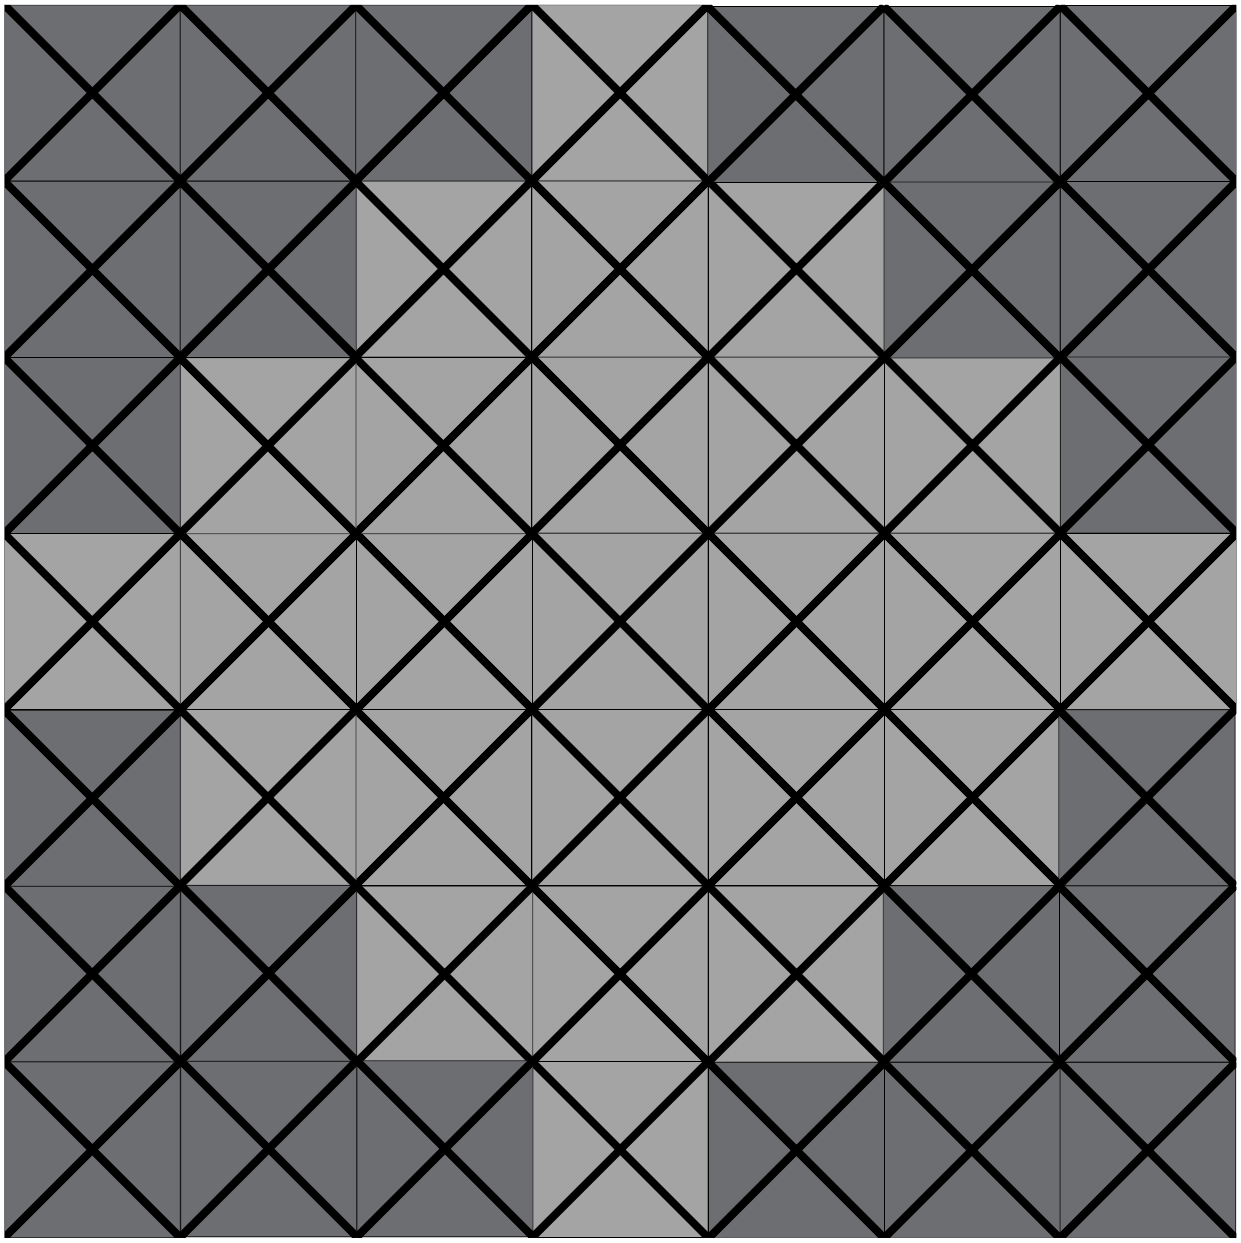 The 4th patiki pattern (grey) surrounded by four T3 shapes.